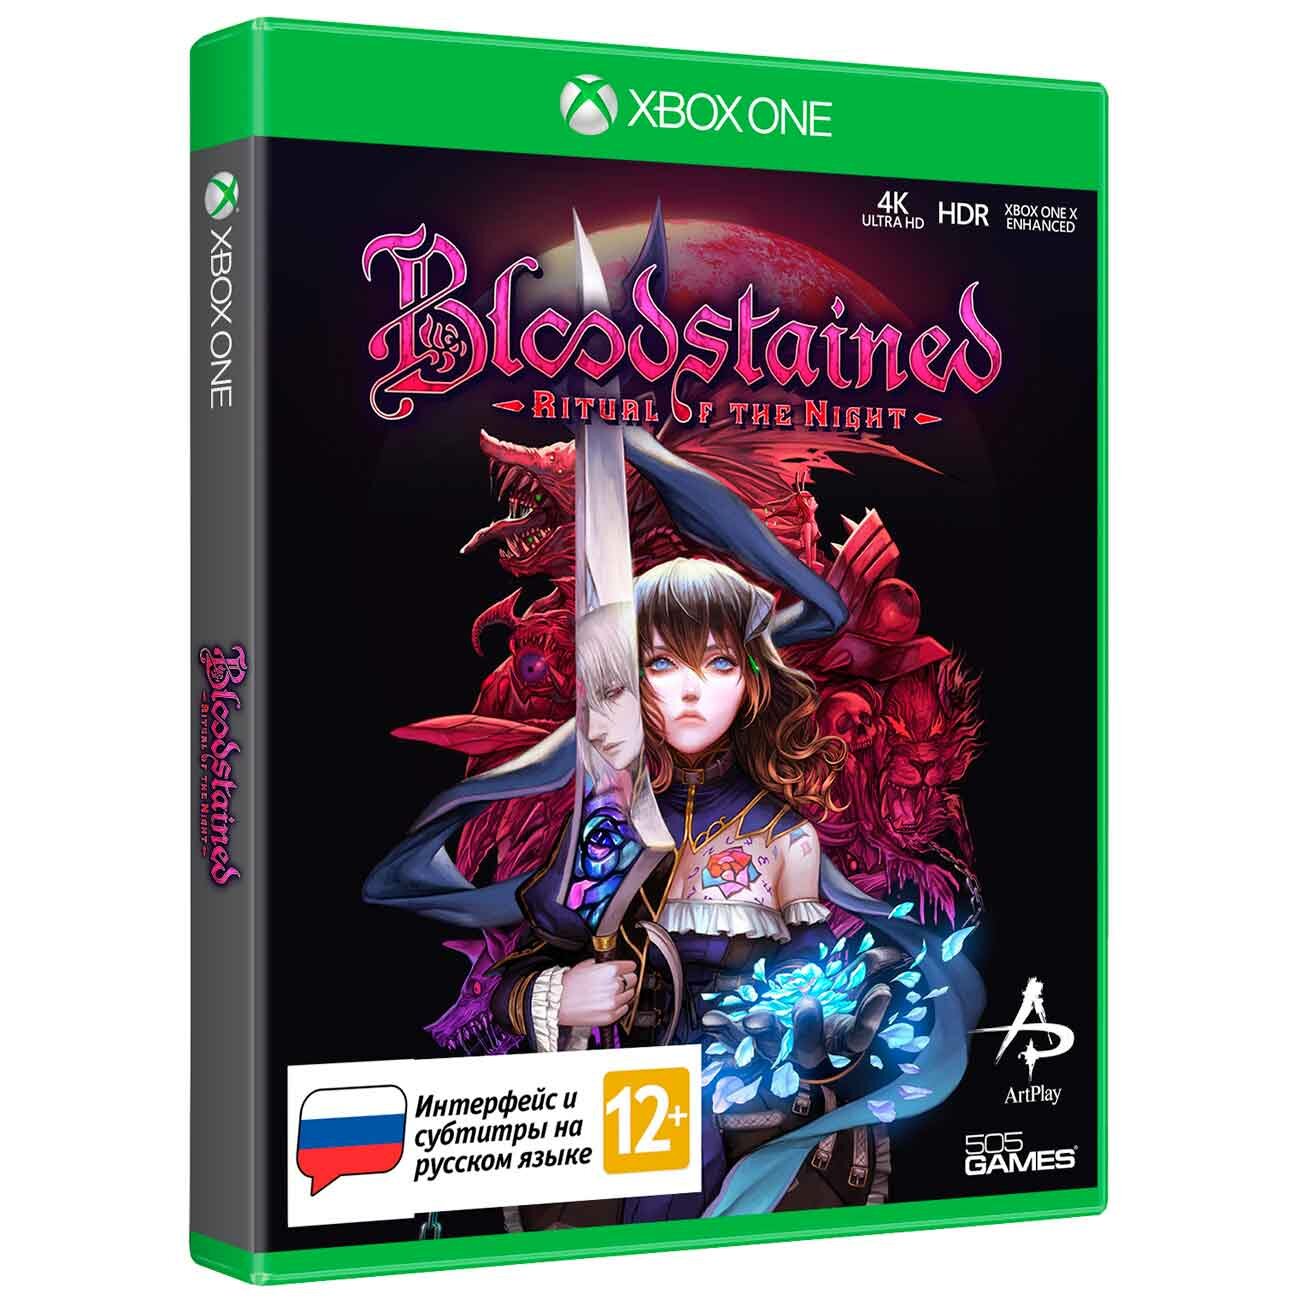 Xbox  505 Games Bloodstained: Ritual of the Night